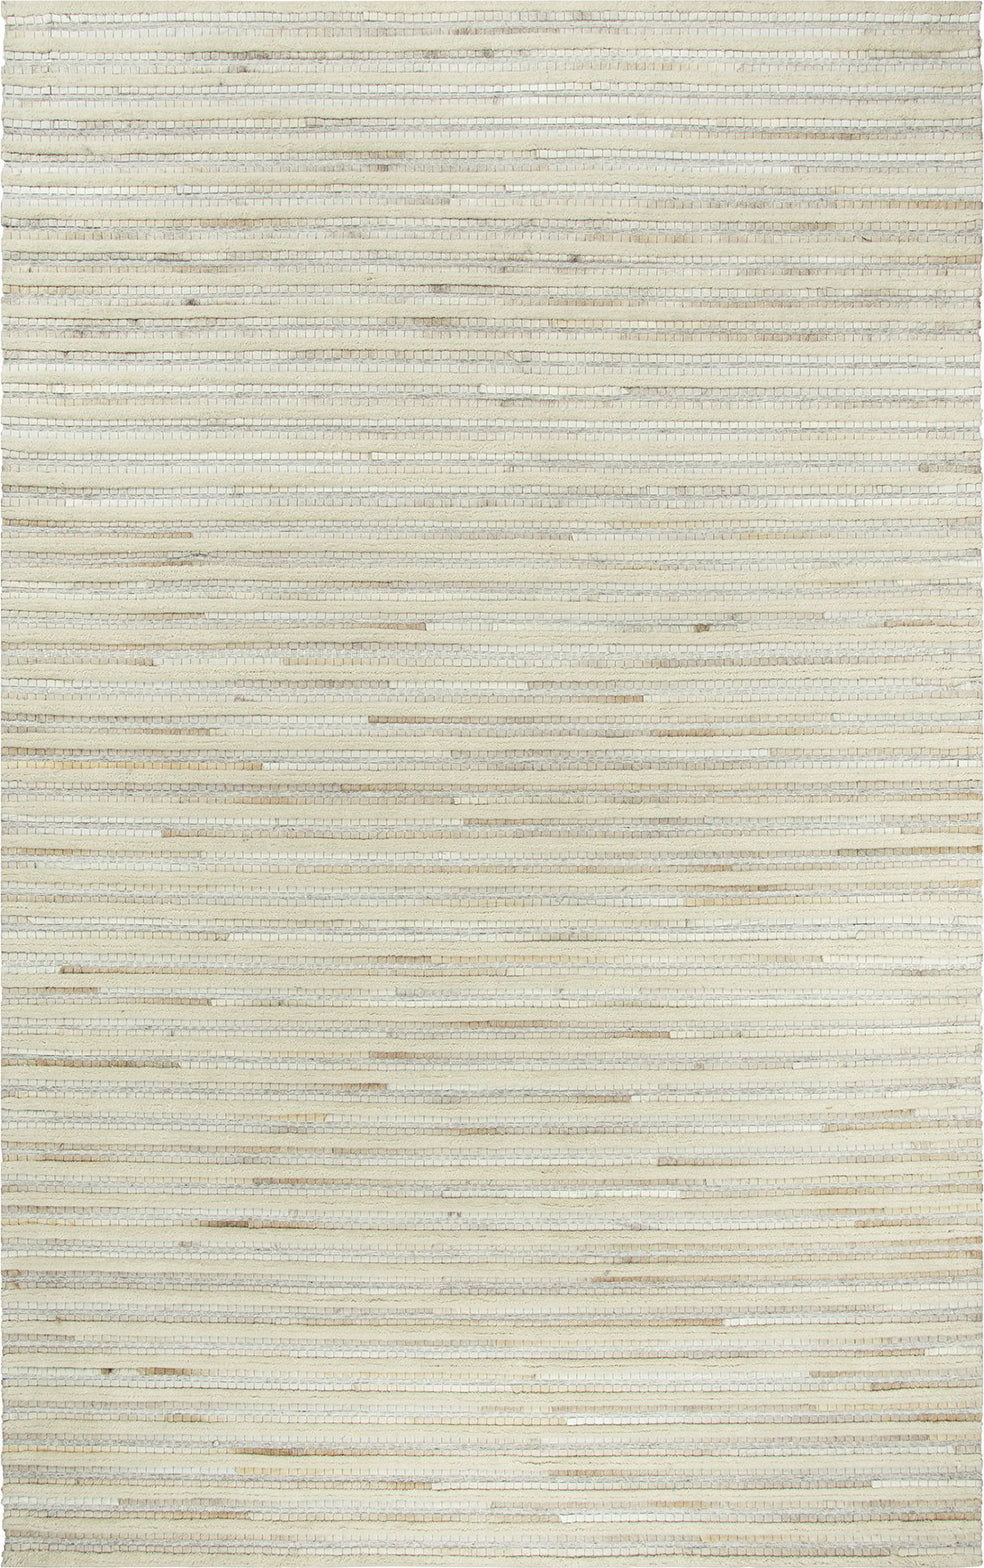 Rizzy Wild Thing WDT105 Neutral Area Rug by Donny Osmond Home main image